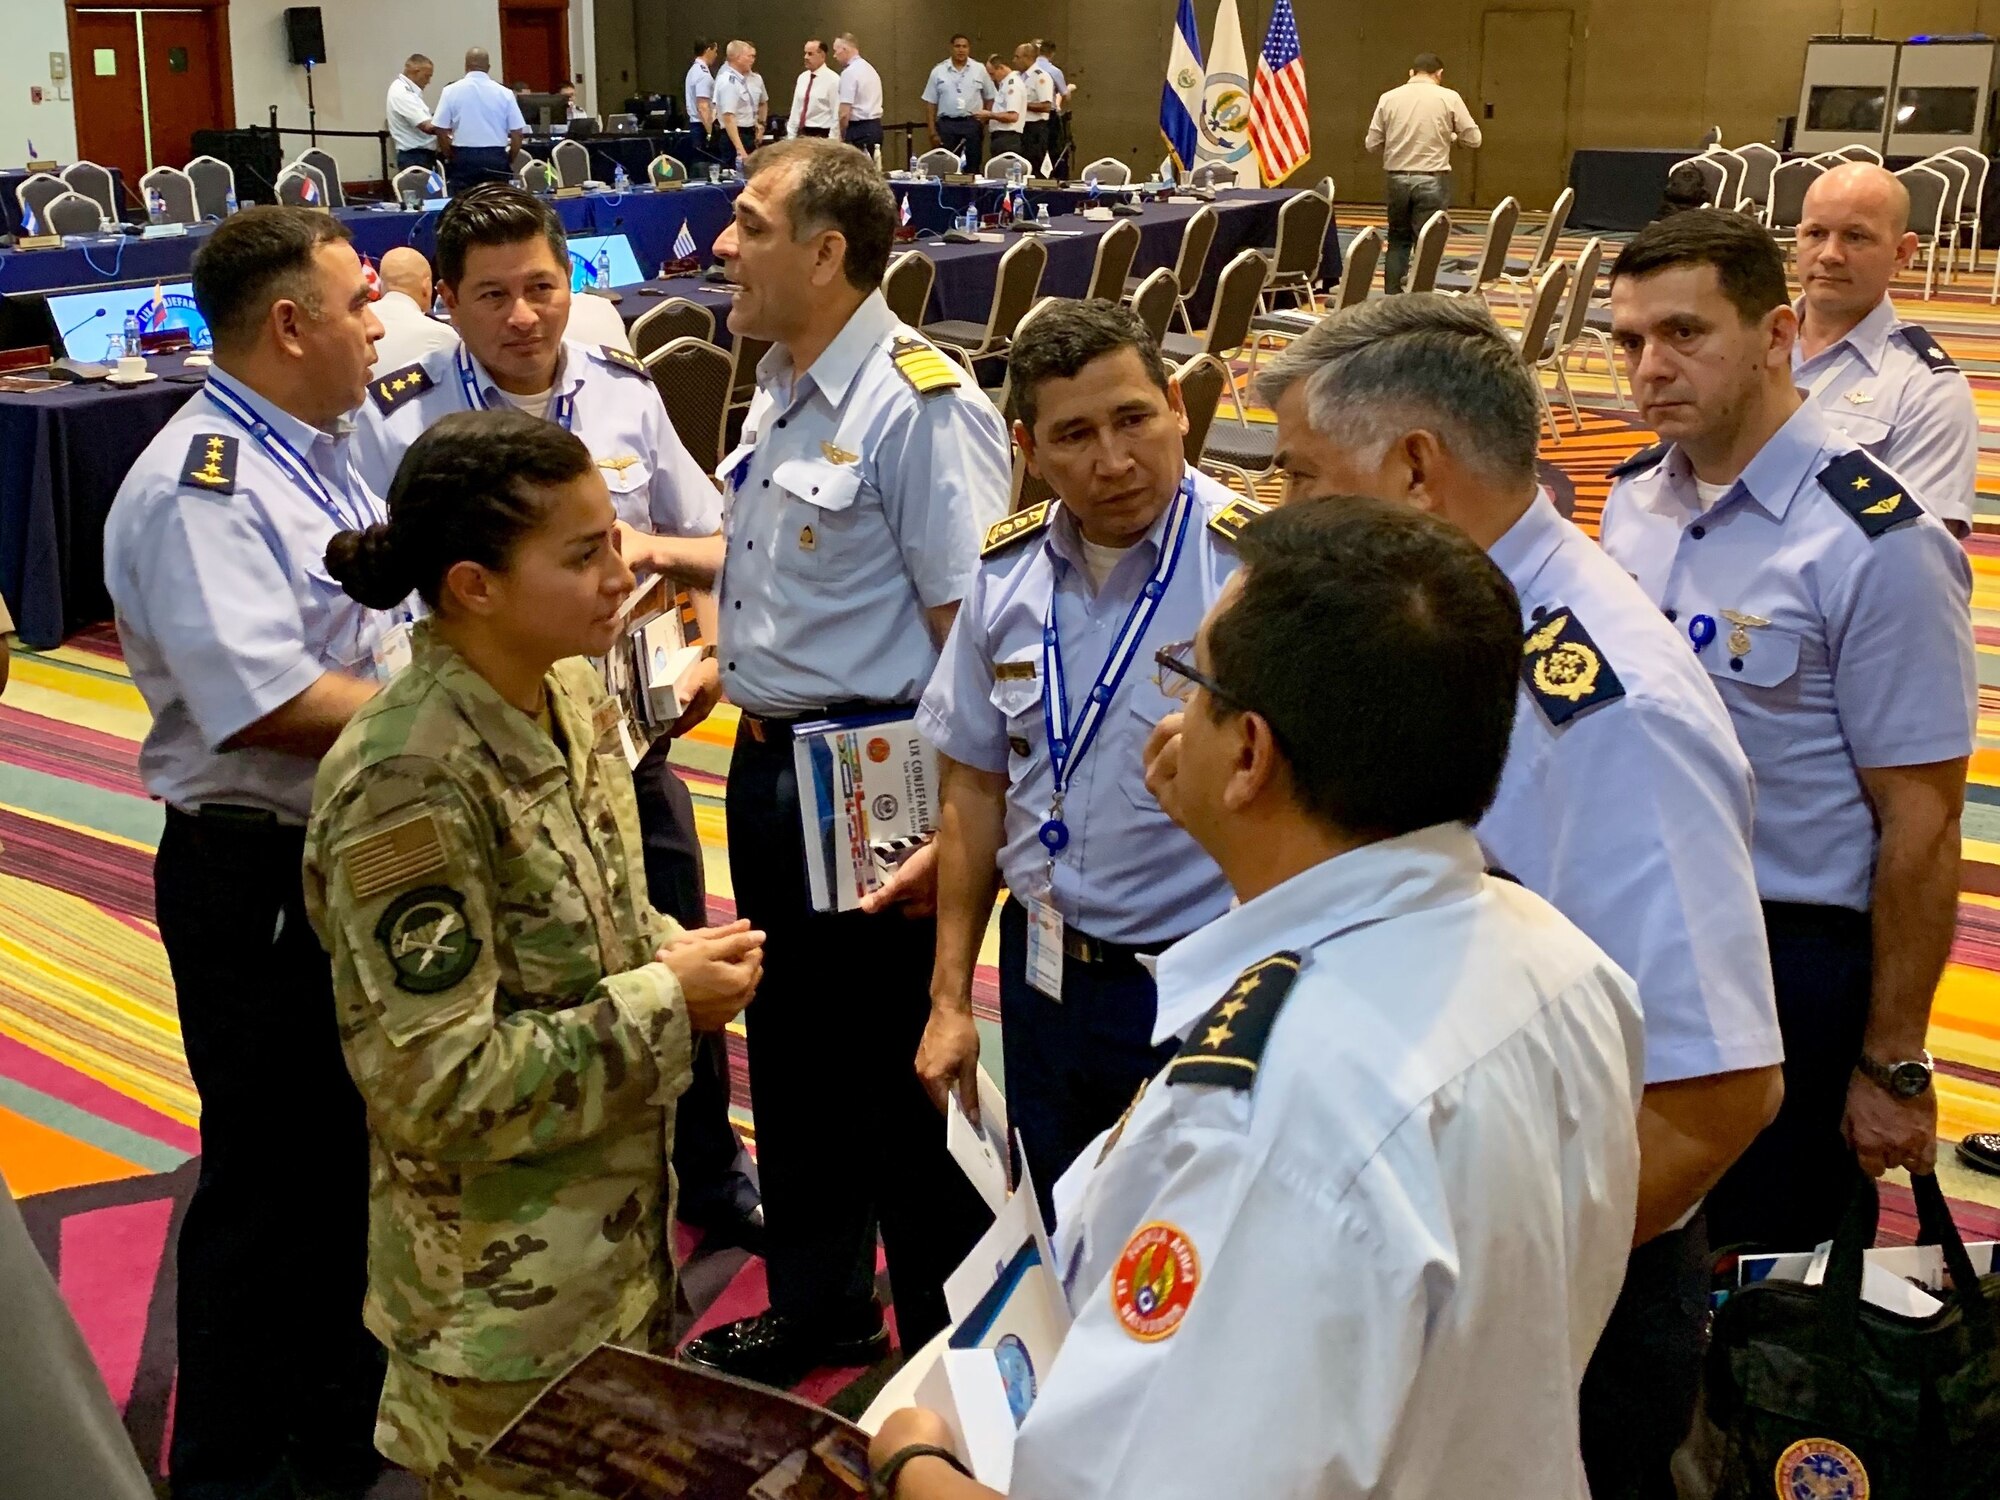 1st Lt. Lorrayne Kealty, 14th Air Support Operations Squadron, Pope Army Air Field, N.C., speaks with Central and South American air force leaders at the Conference of American Air Chiefs in Panama in June 2019. As a Language Enabled Airman Program scholar, Kealty presented at the conference at the encouragement of her squadron commander, Lt. Col. Christopher Sweeny. Conference attendees were pleasantly surprised by Kealty’s mastery of their native language, choosing to listen to her in person instead of relying on interpreters speaking through their earpieces. (Courtesy photo)